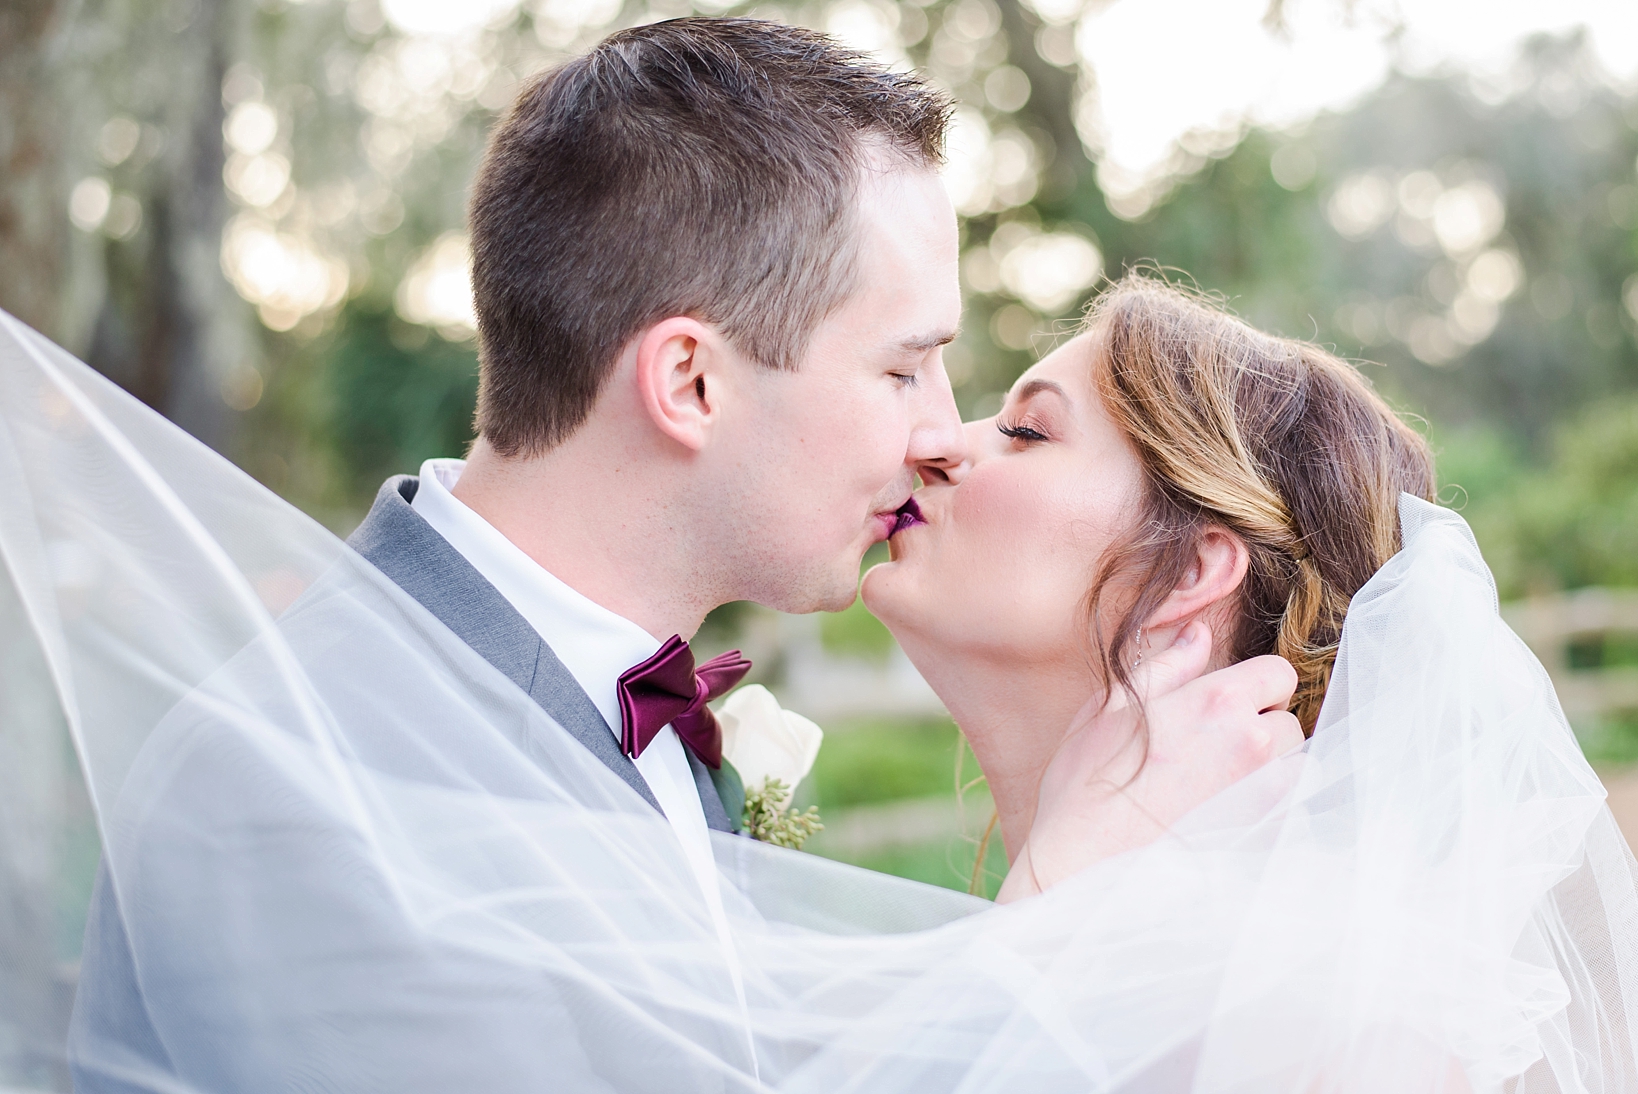 A kissing Bride and Groom surrounded by the cathedral veil